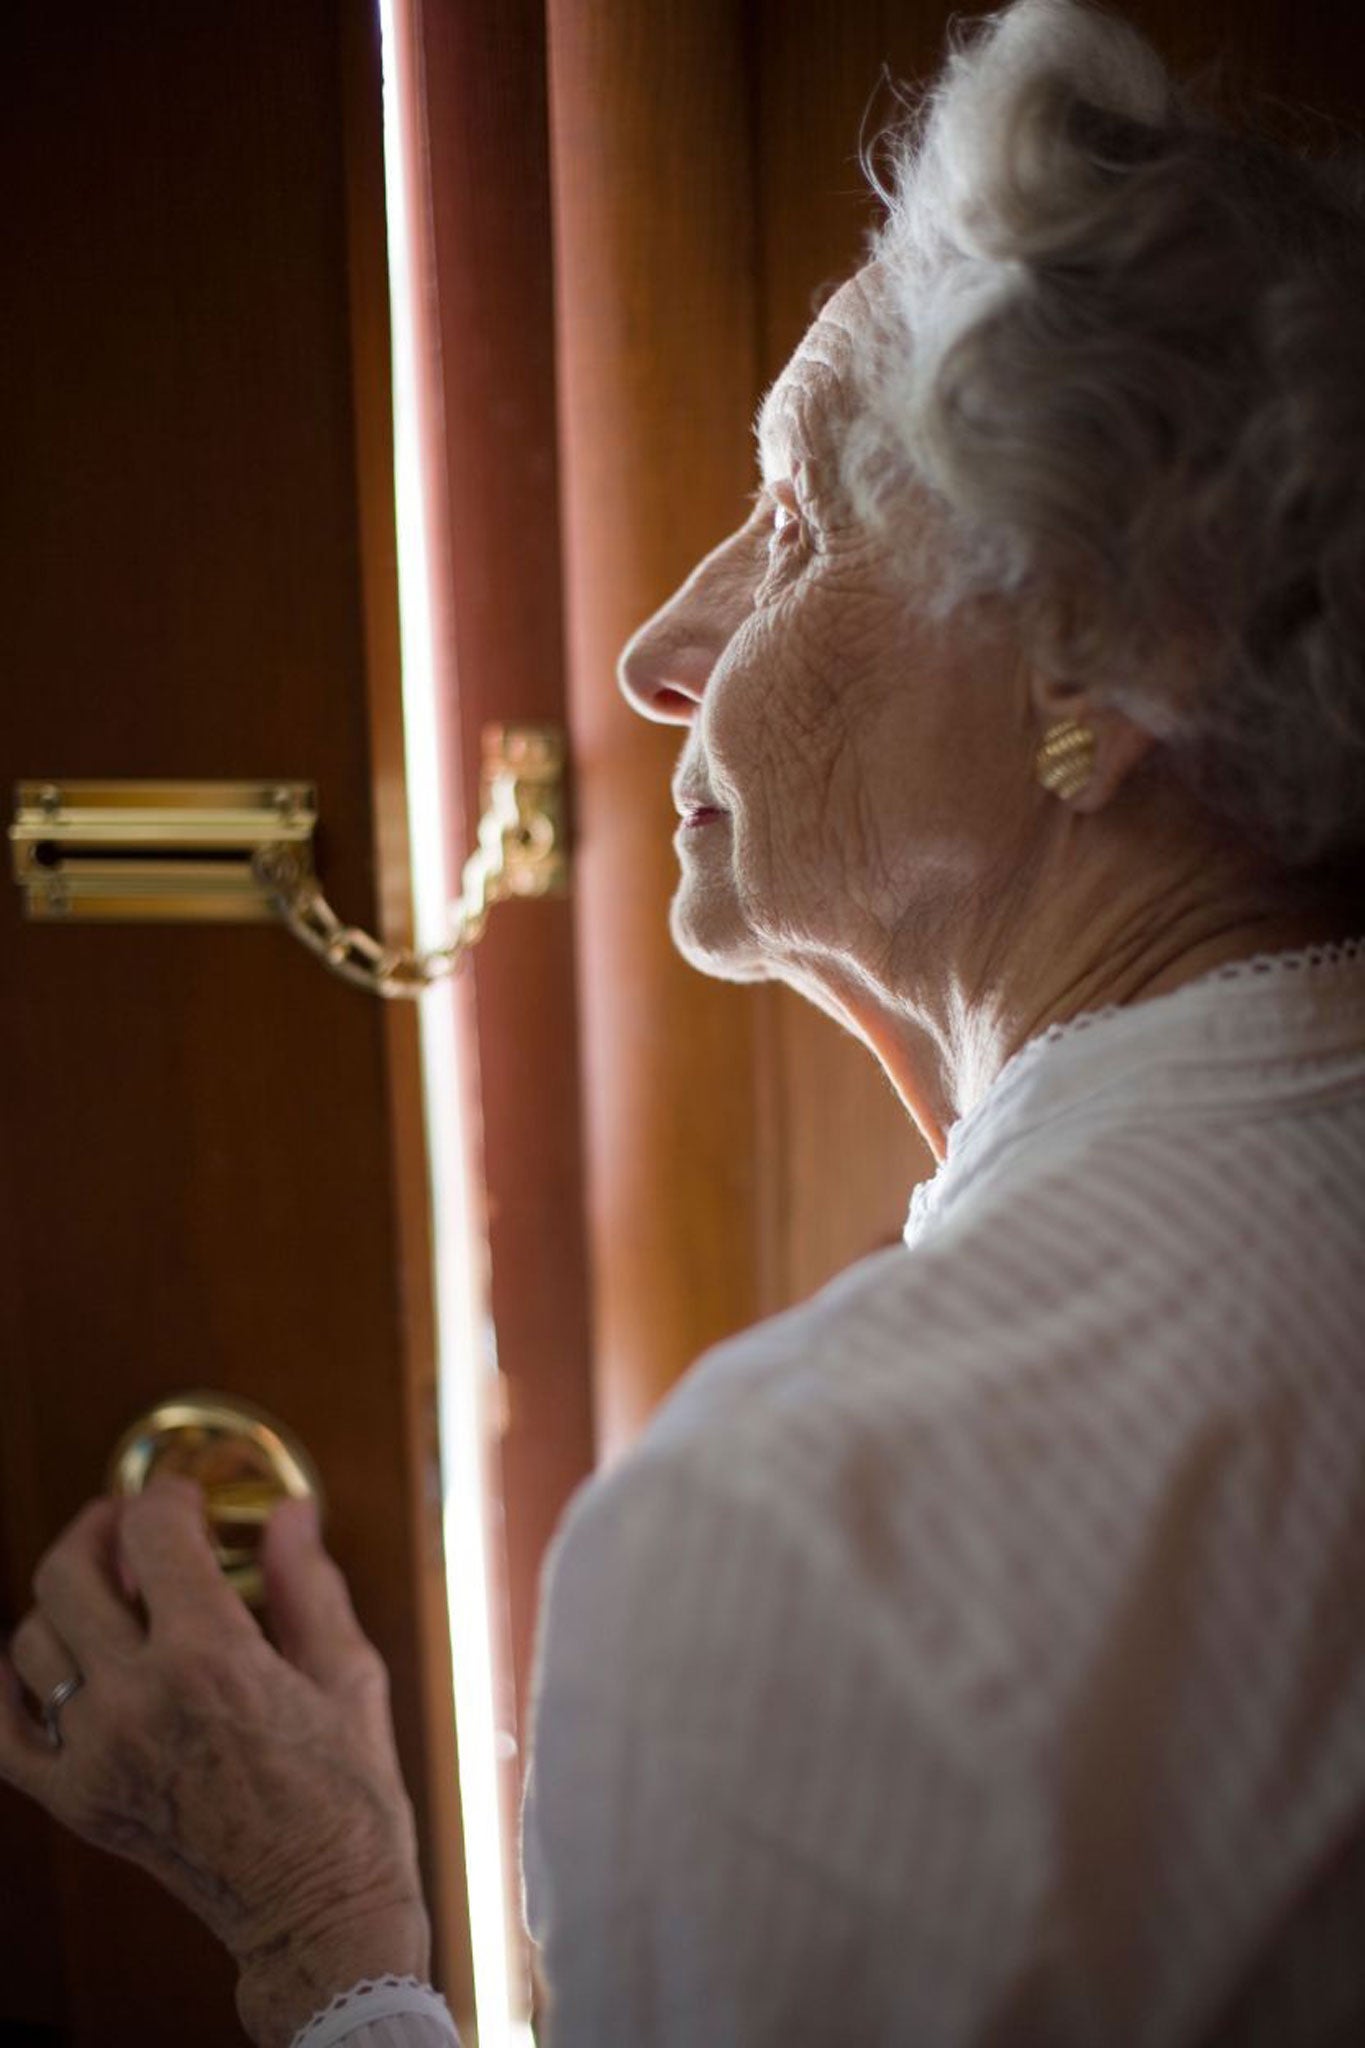 Foot in the door: 'gullible oldies' are being targeted for cons. In one case an estate agent sought to cheat a victim out of hundreds of thousands of pounds on a property sale after being invited into his home